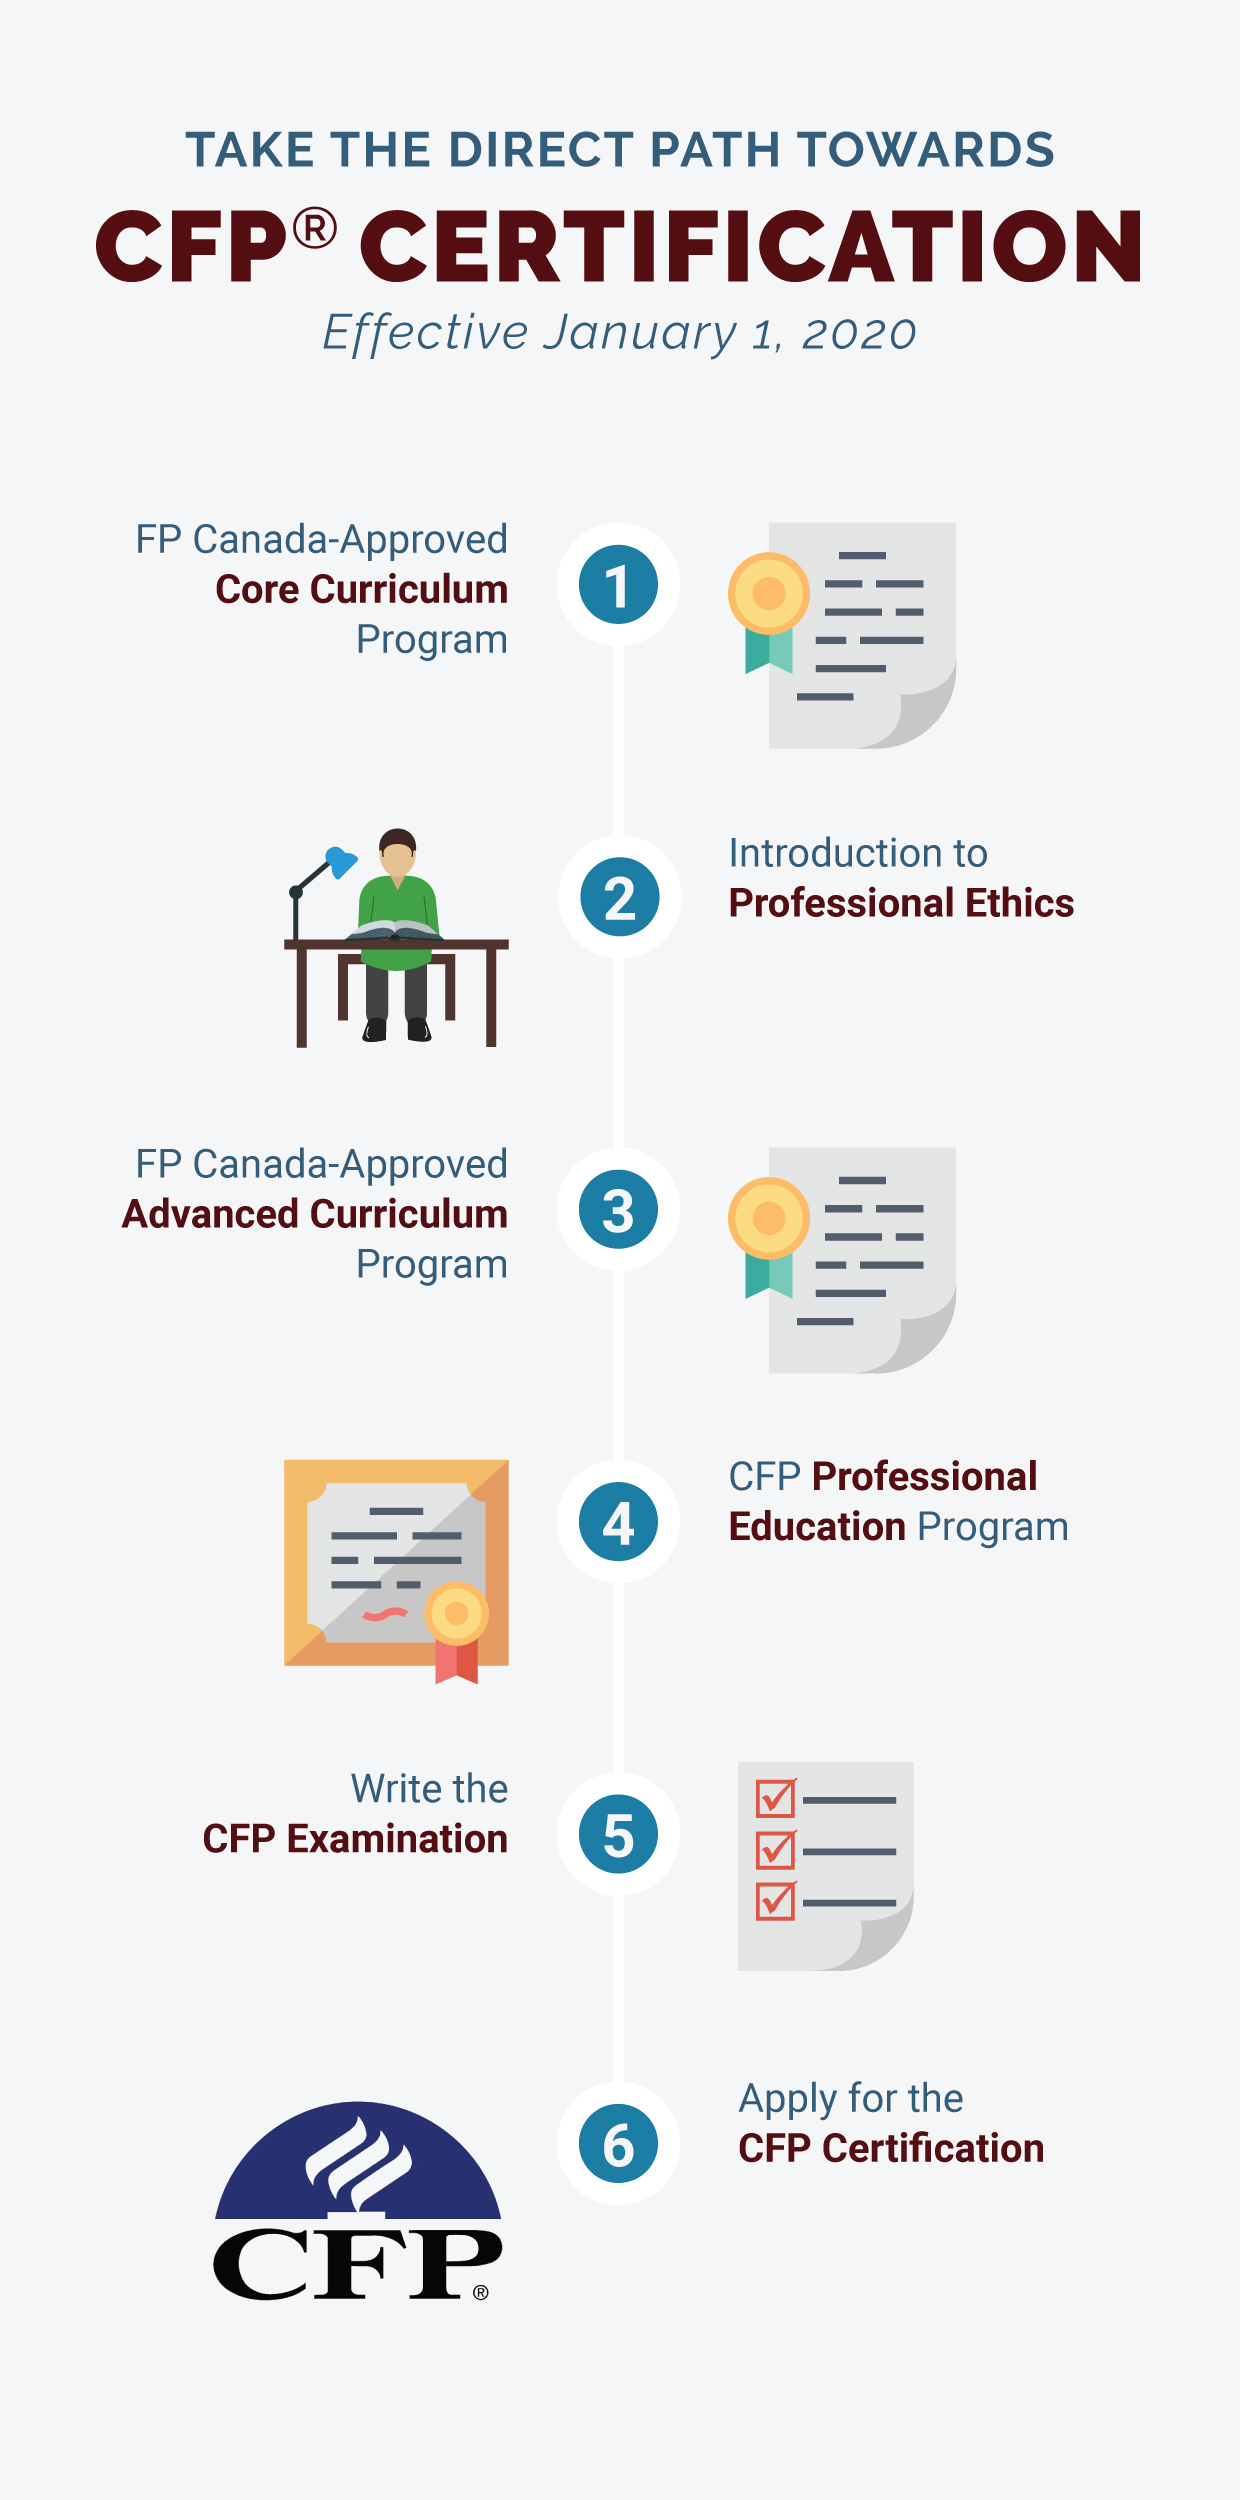 Path to CFP certification